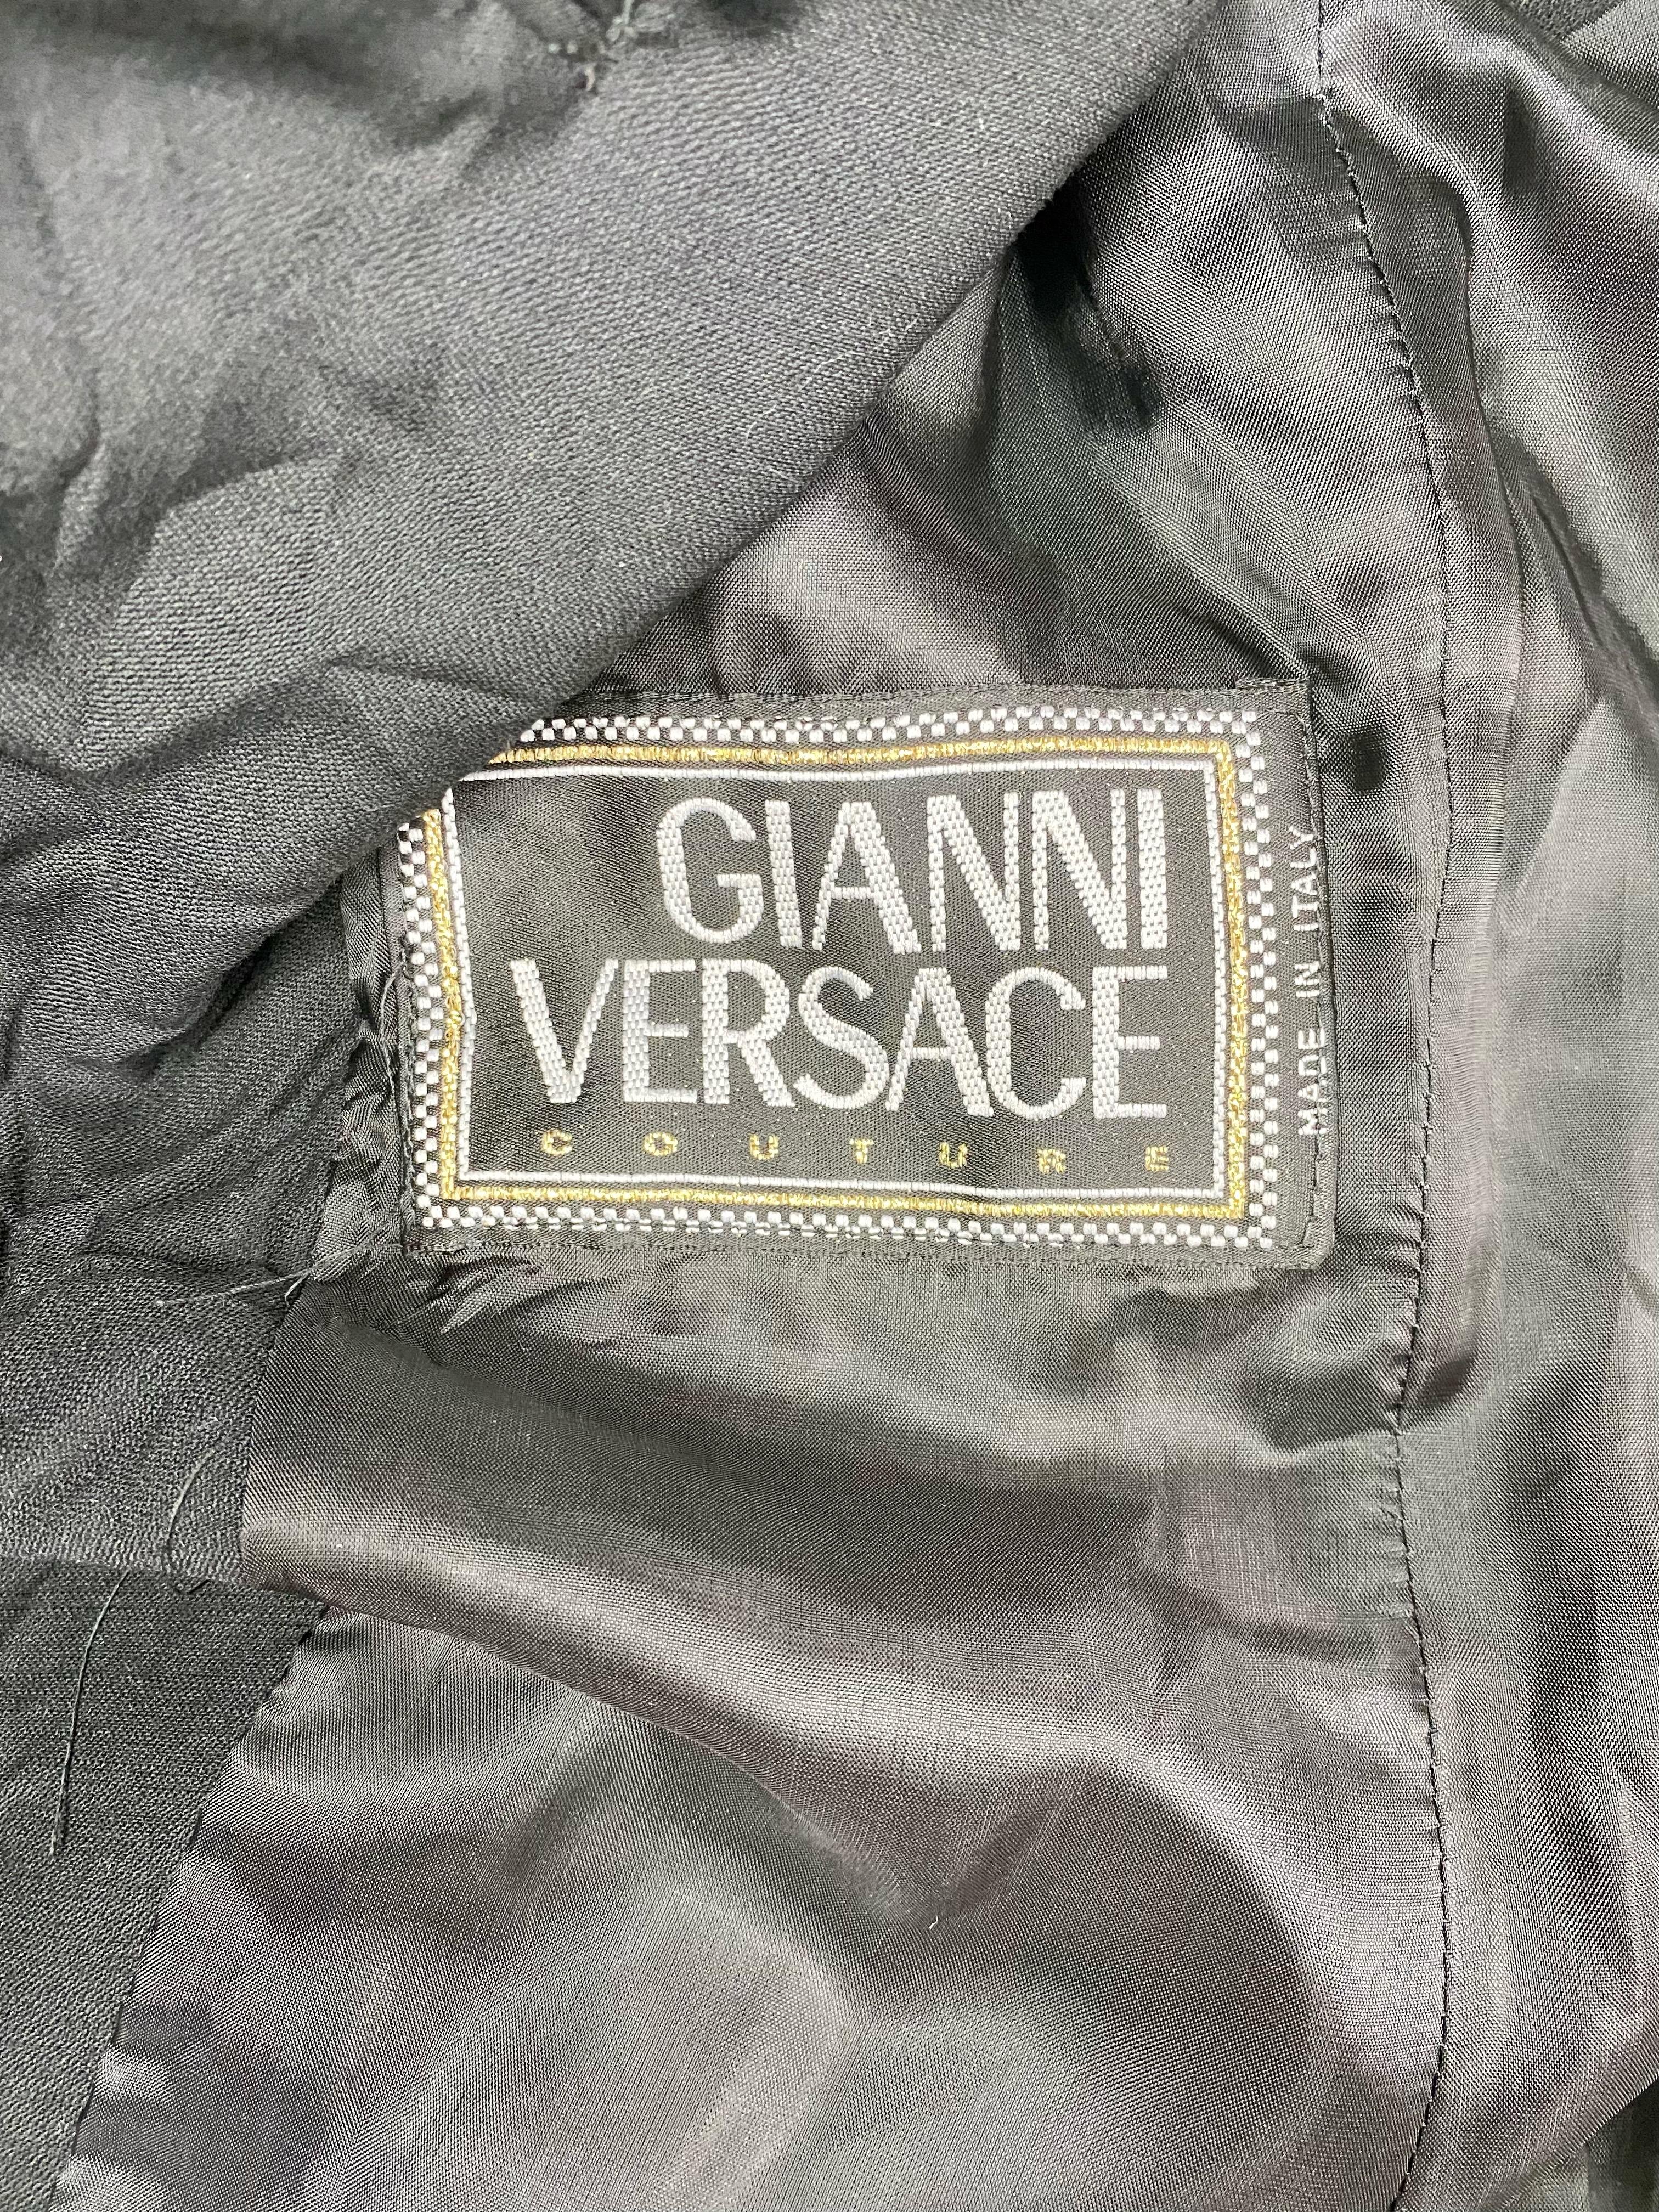 S/S 1994 Gianni Versace Couture Medusa Safety Pin Blazer Runway  For Sale 3